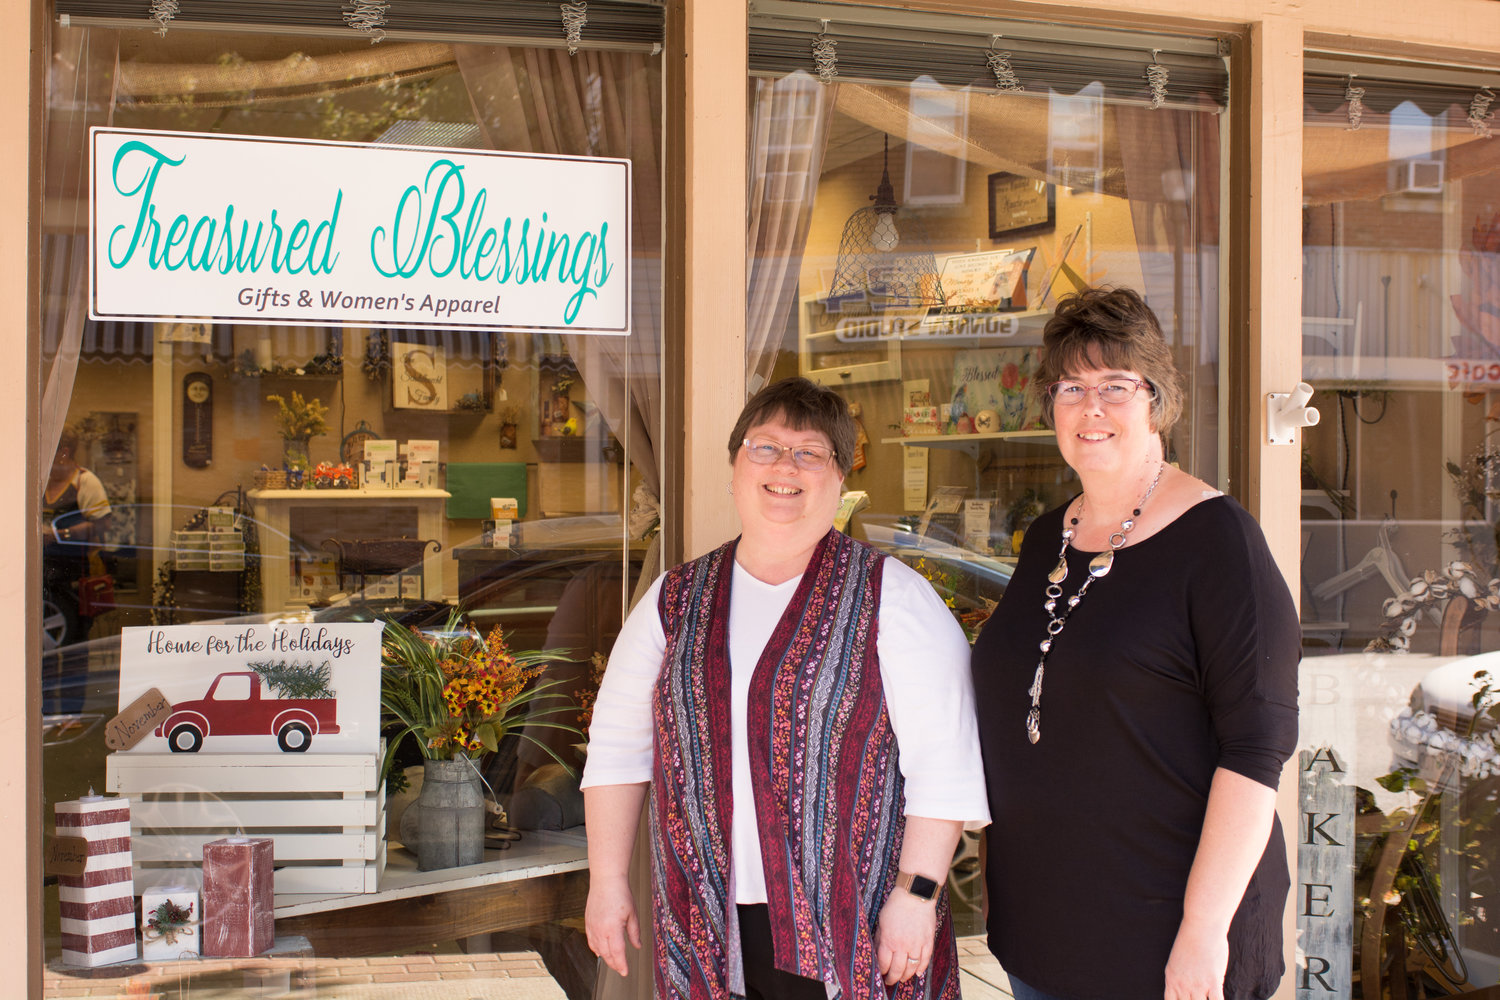 Treasured Blessings offers hand-crafted products in downtown